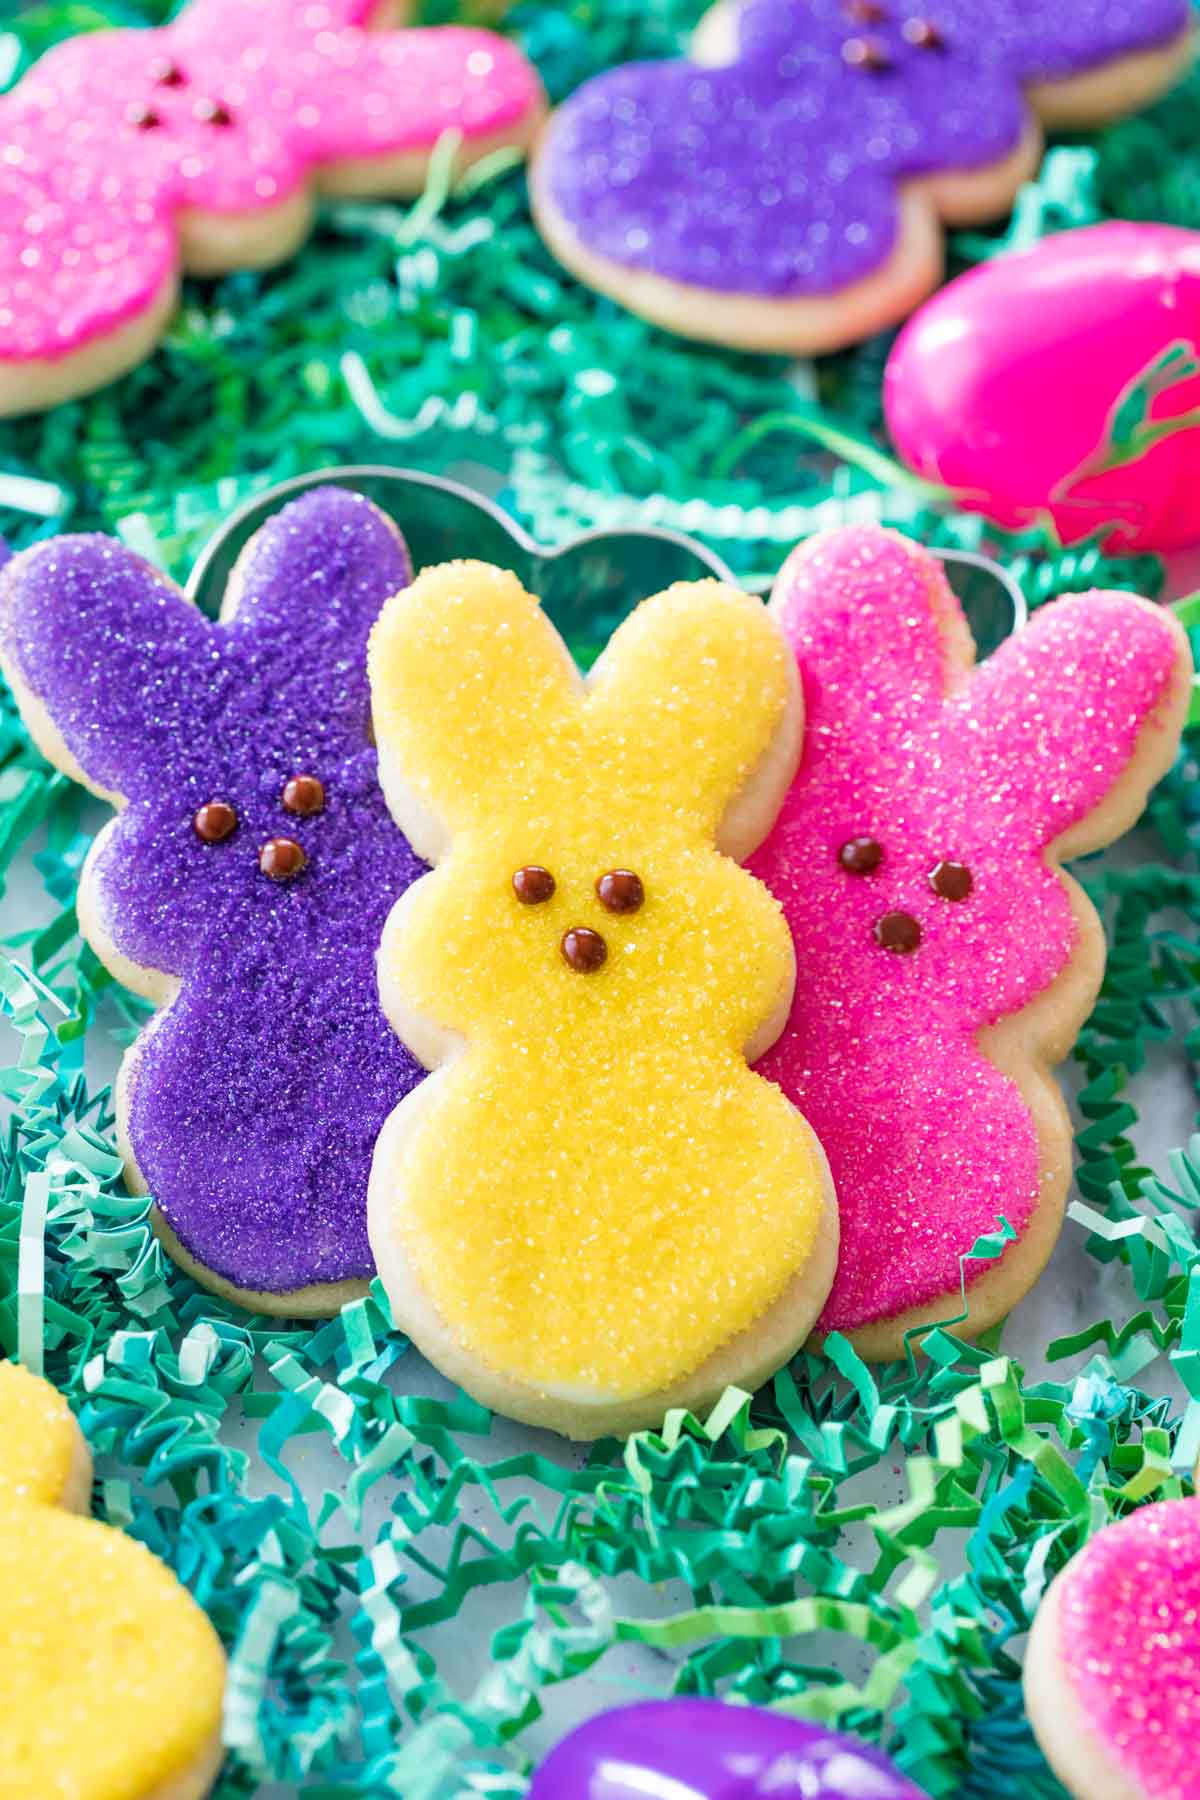 three colorful bunny shaped sugar cookies decorated to look like peeps marshmallows